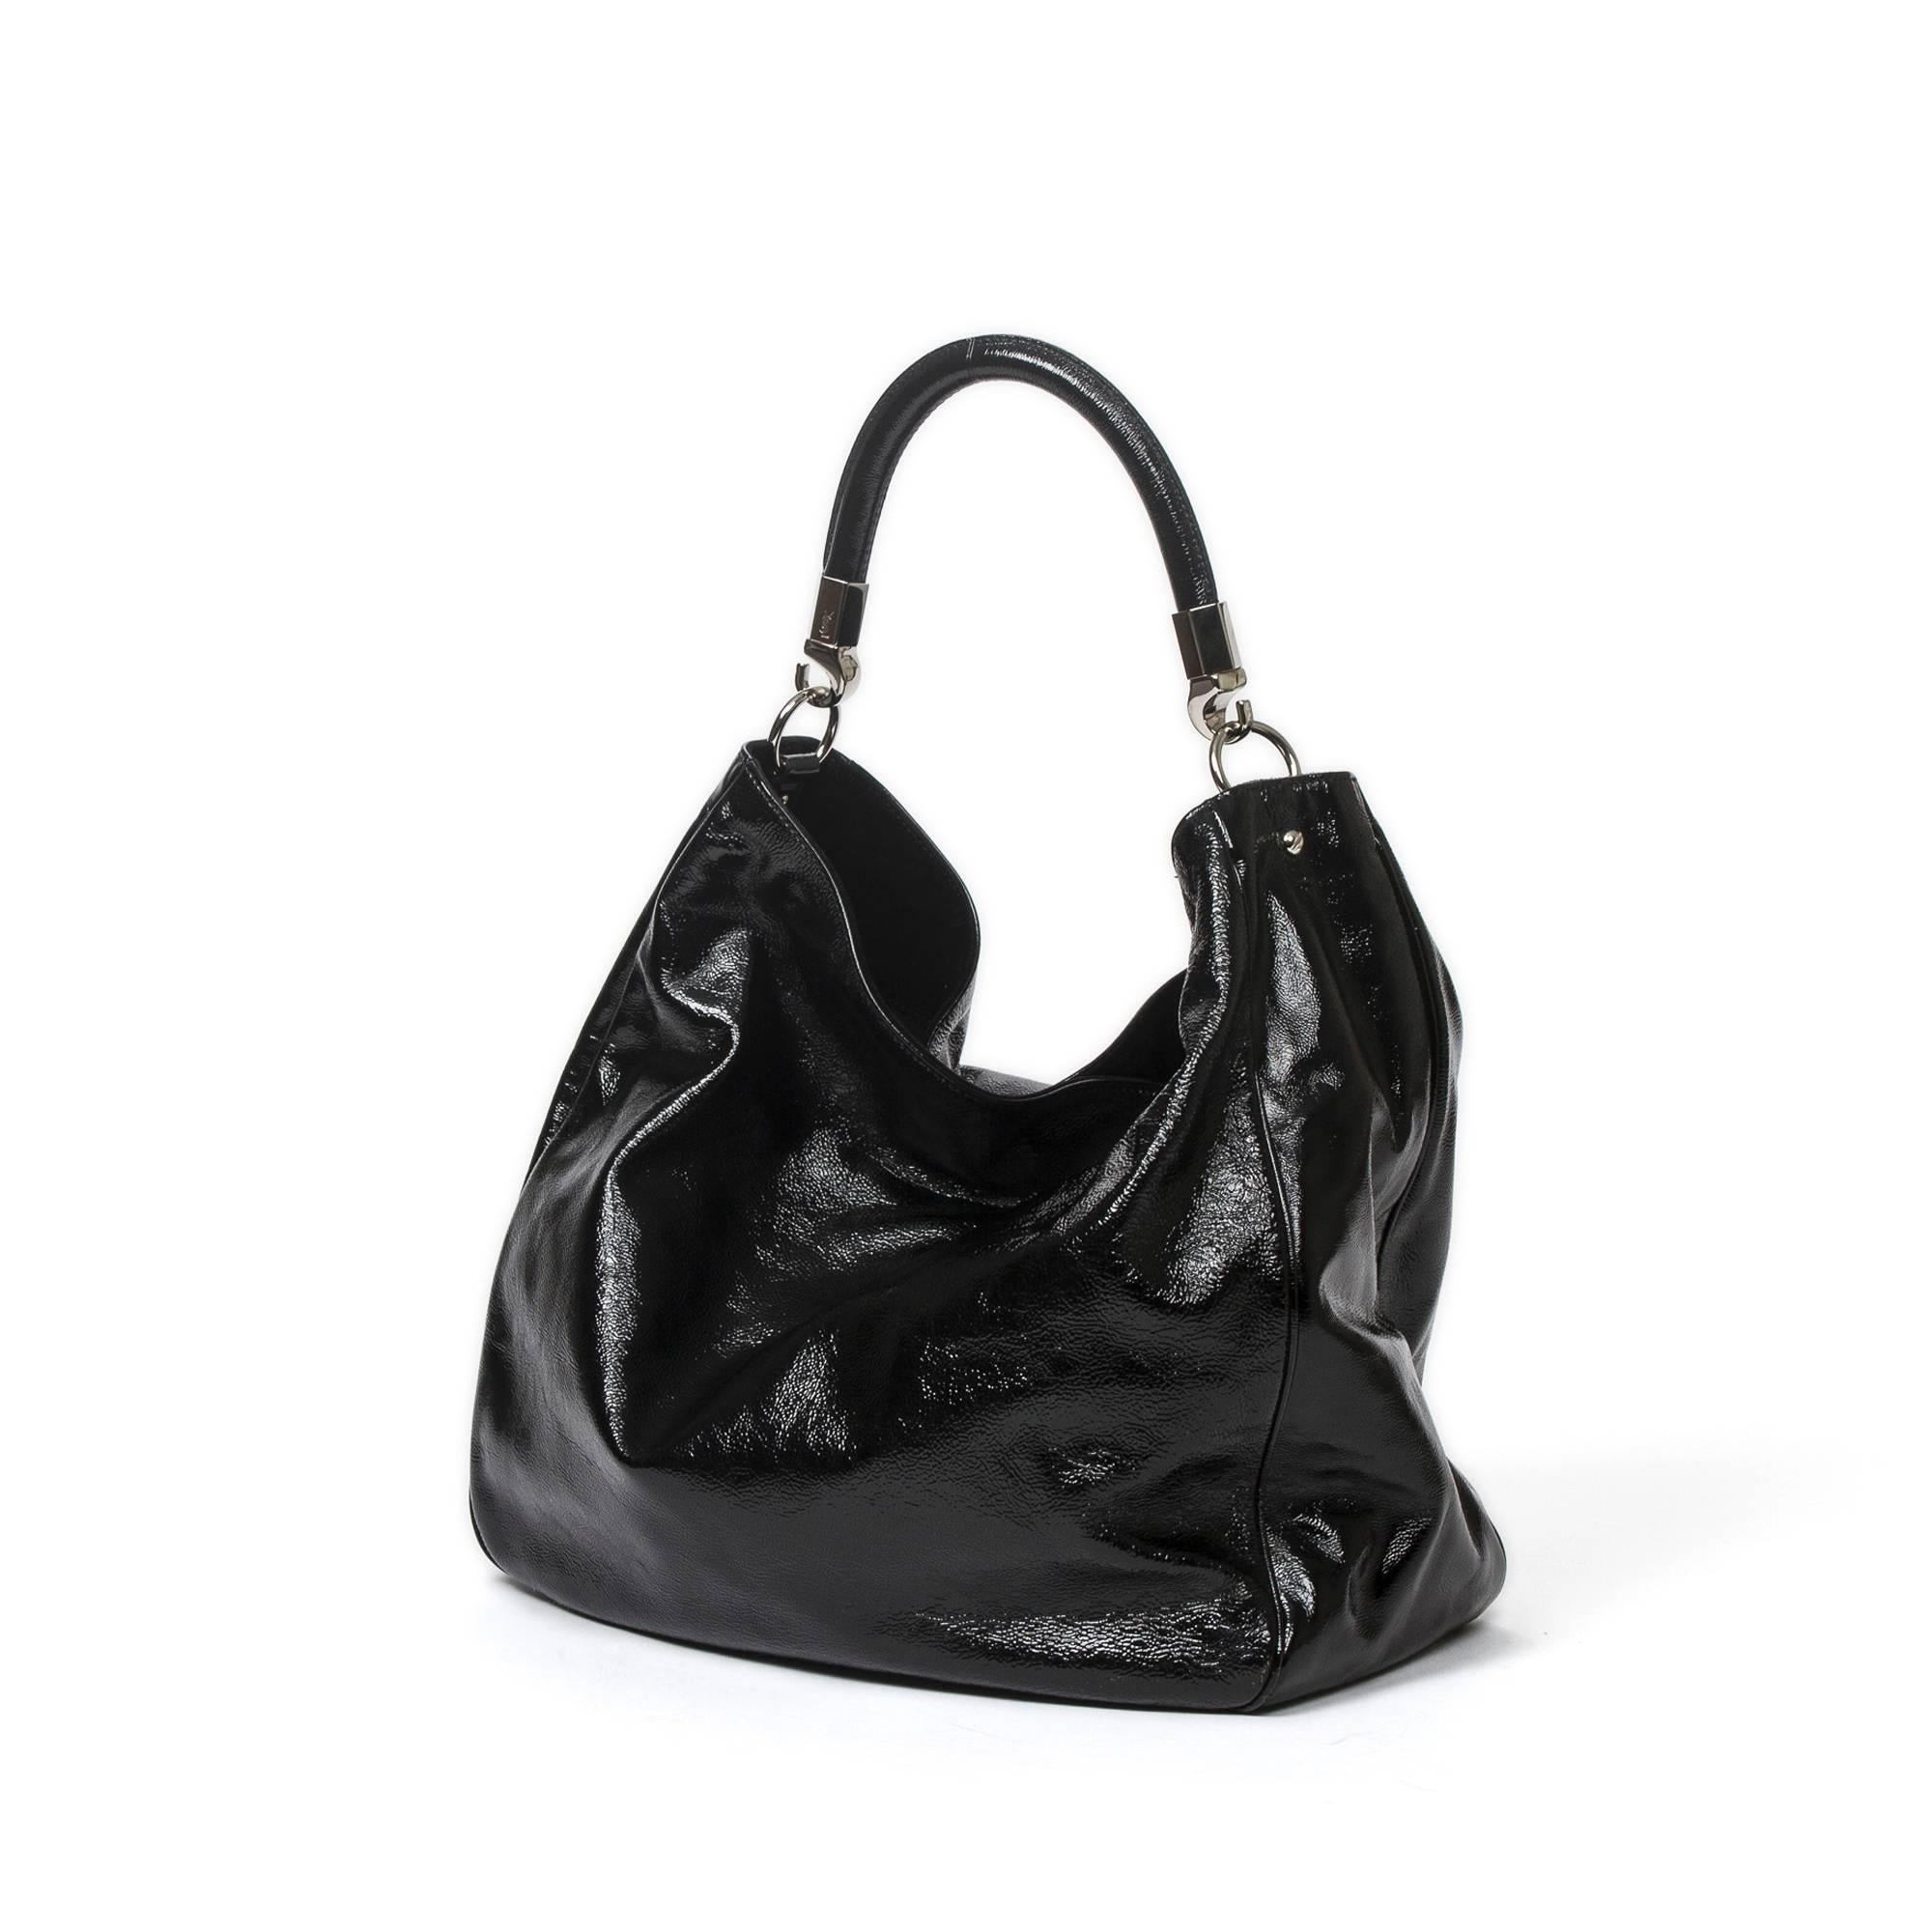 Yves Saint-Laurent	Roady 35cm in black distressed patent leather with black patent leather handles (22cm) and silver tone hardware. Dustbag included. 
Perfect condition.
